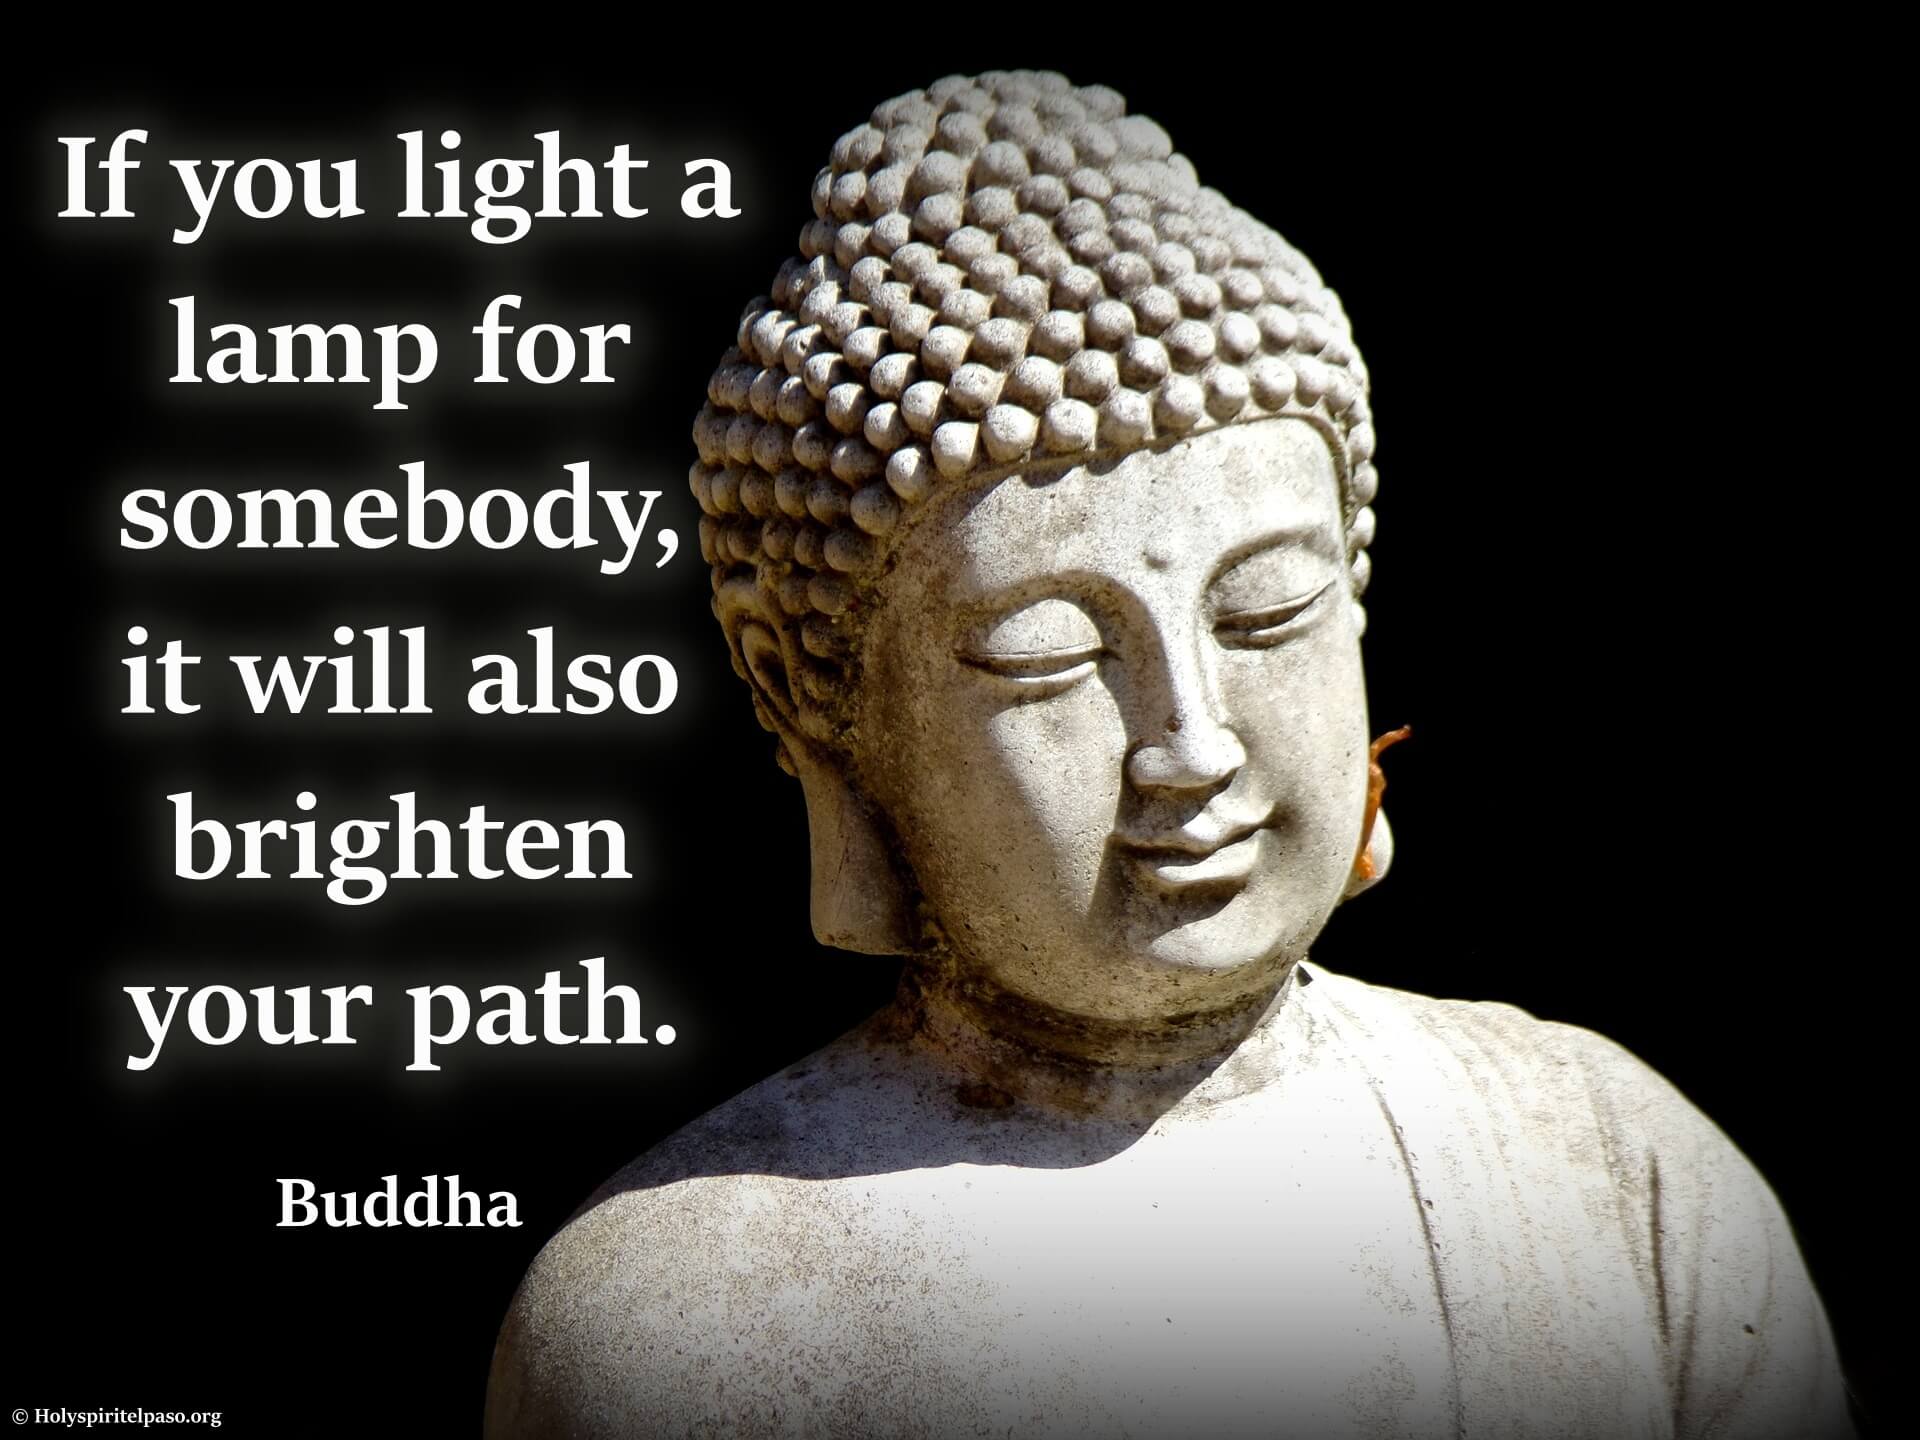 Buddha Quotes On Love 53 Love and Happiness Quotes From